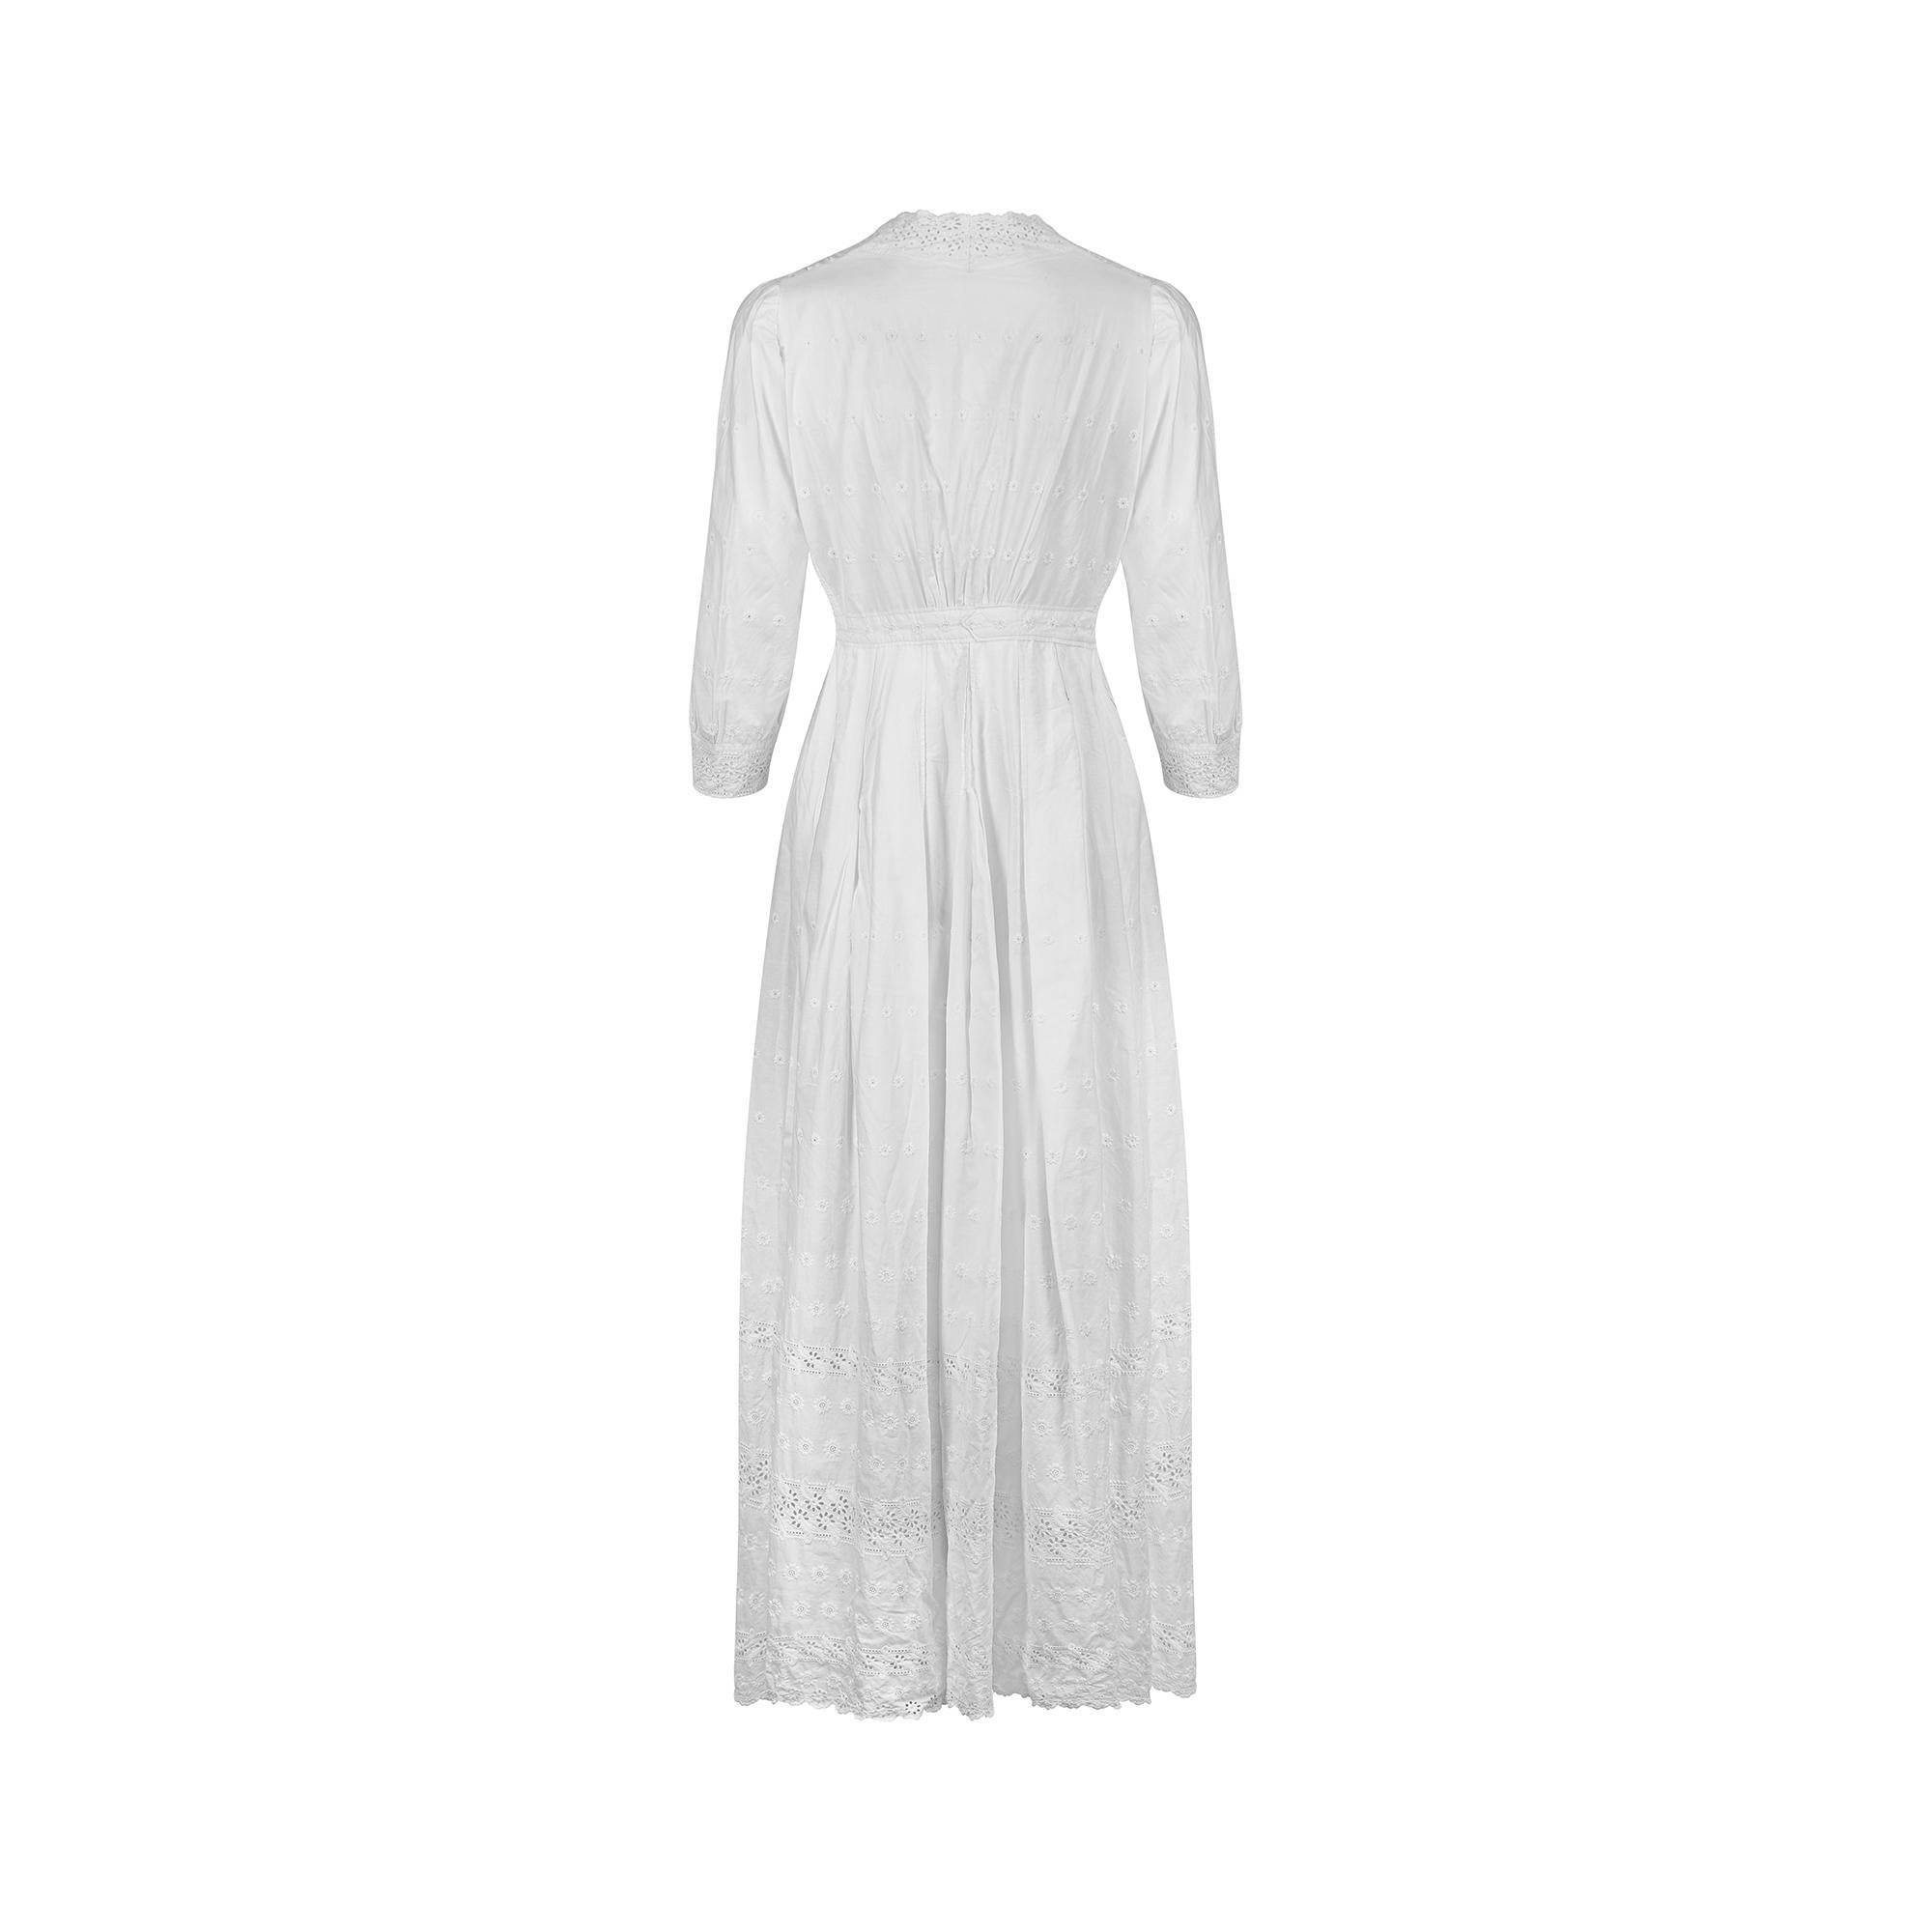 1910s Edwardian White Eyelet Work Wrap Dress In Excellent Condition For Sale In London, GB